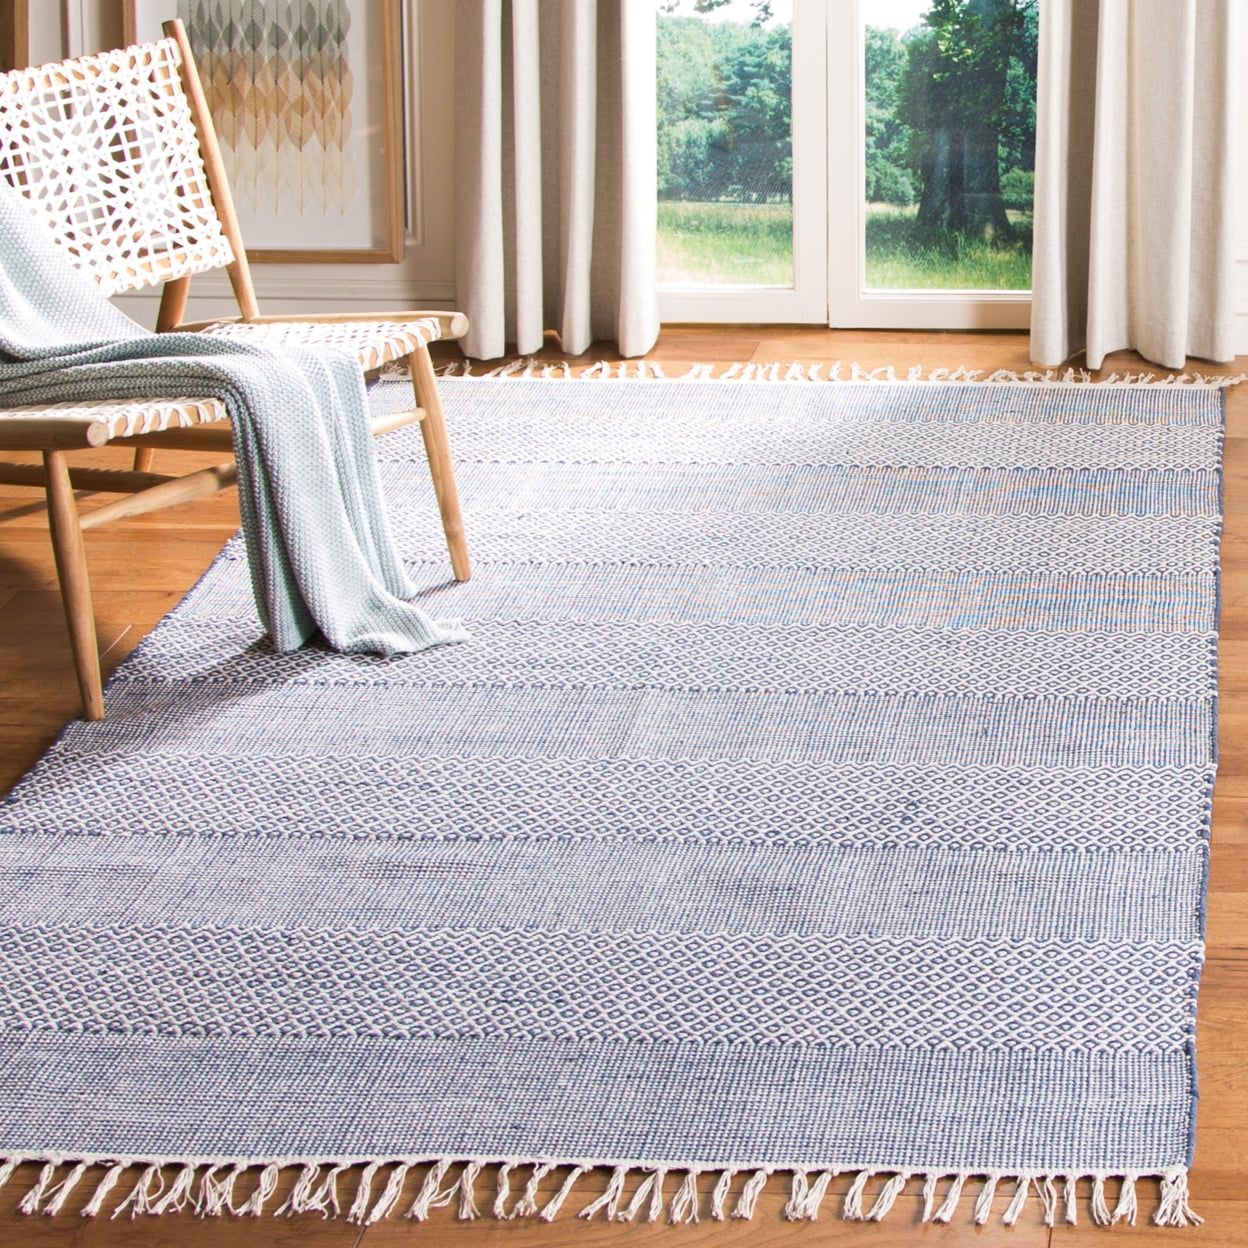 Off-White and Navy 9' x 12' Flat Woven Wool Cotton Area Rug